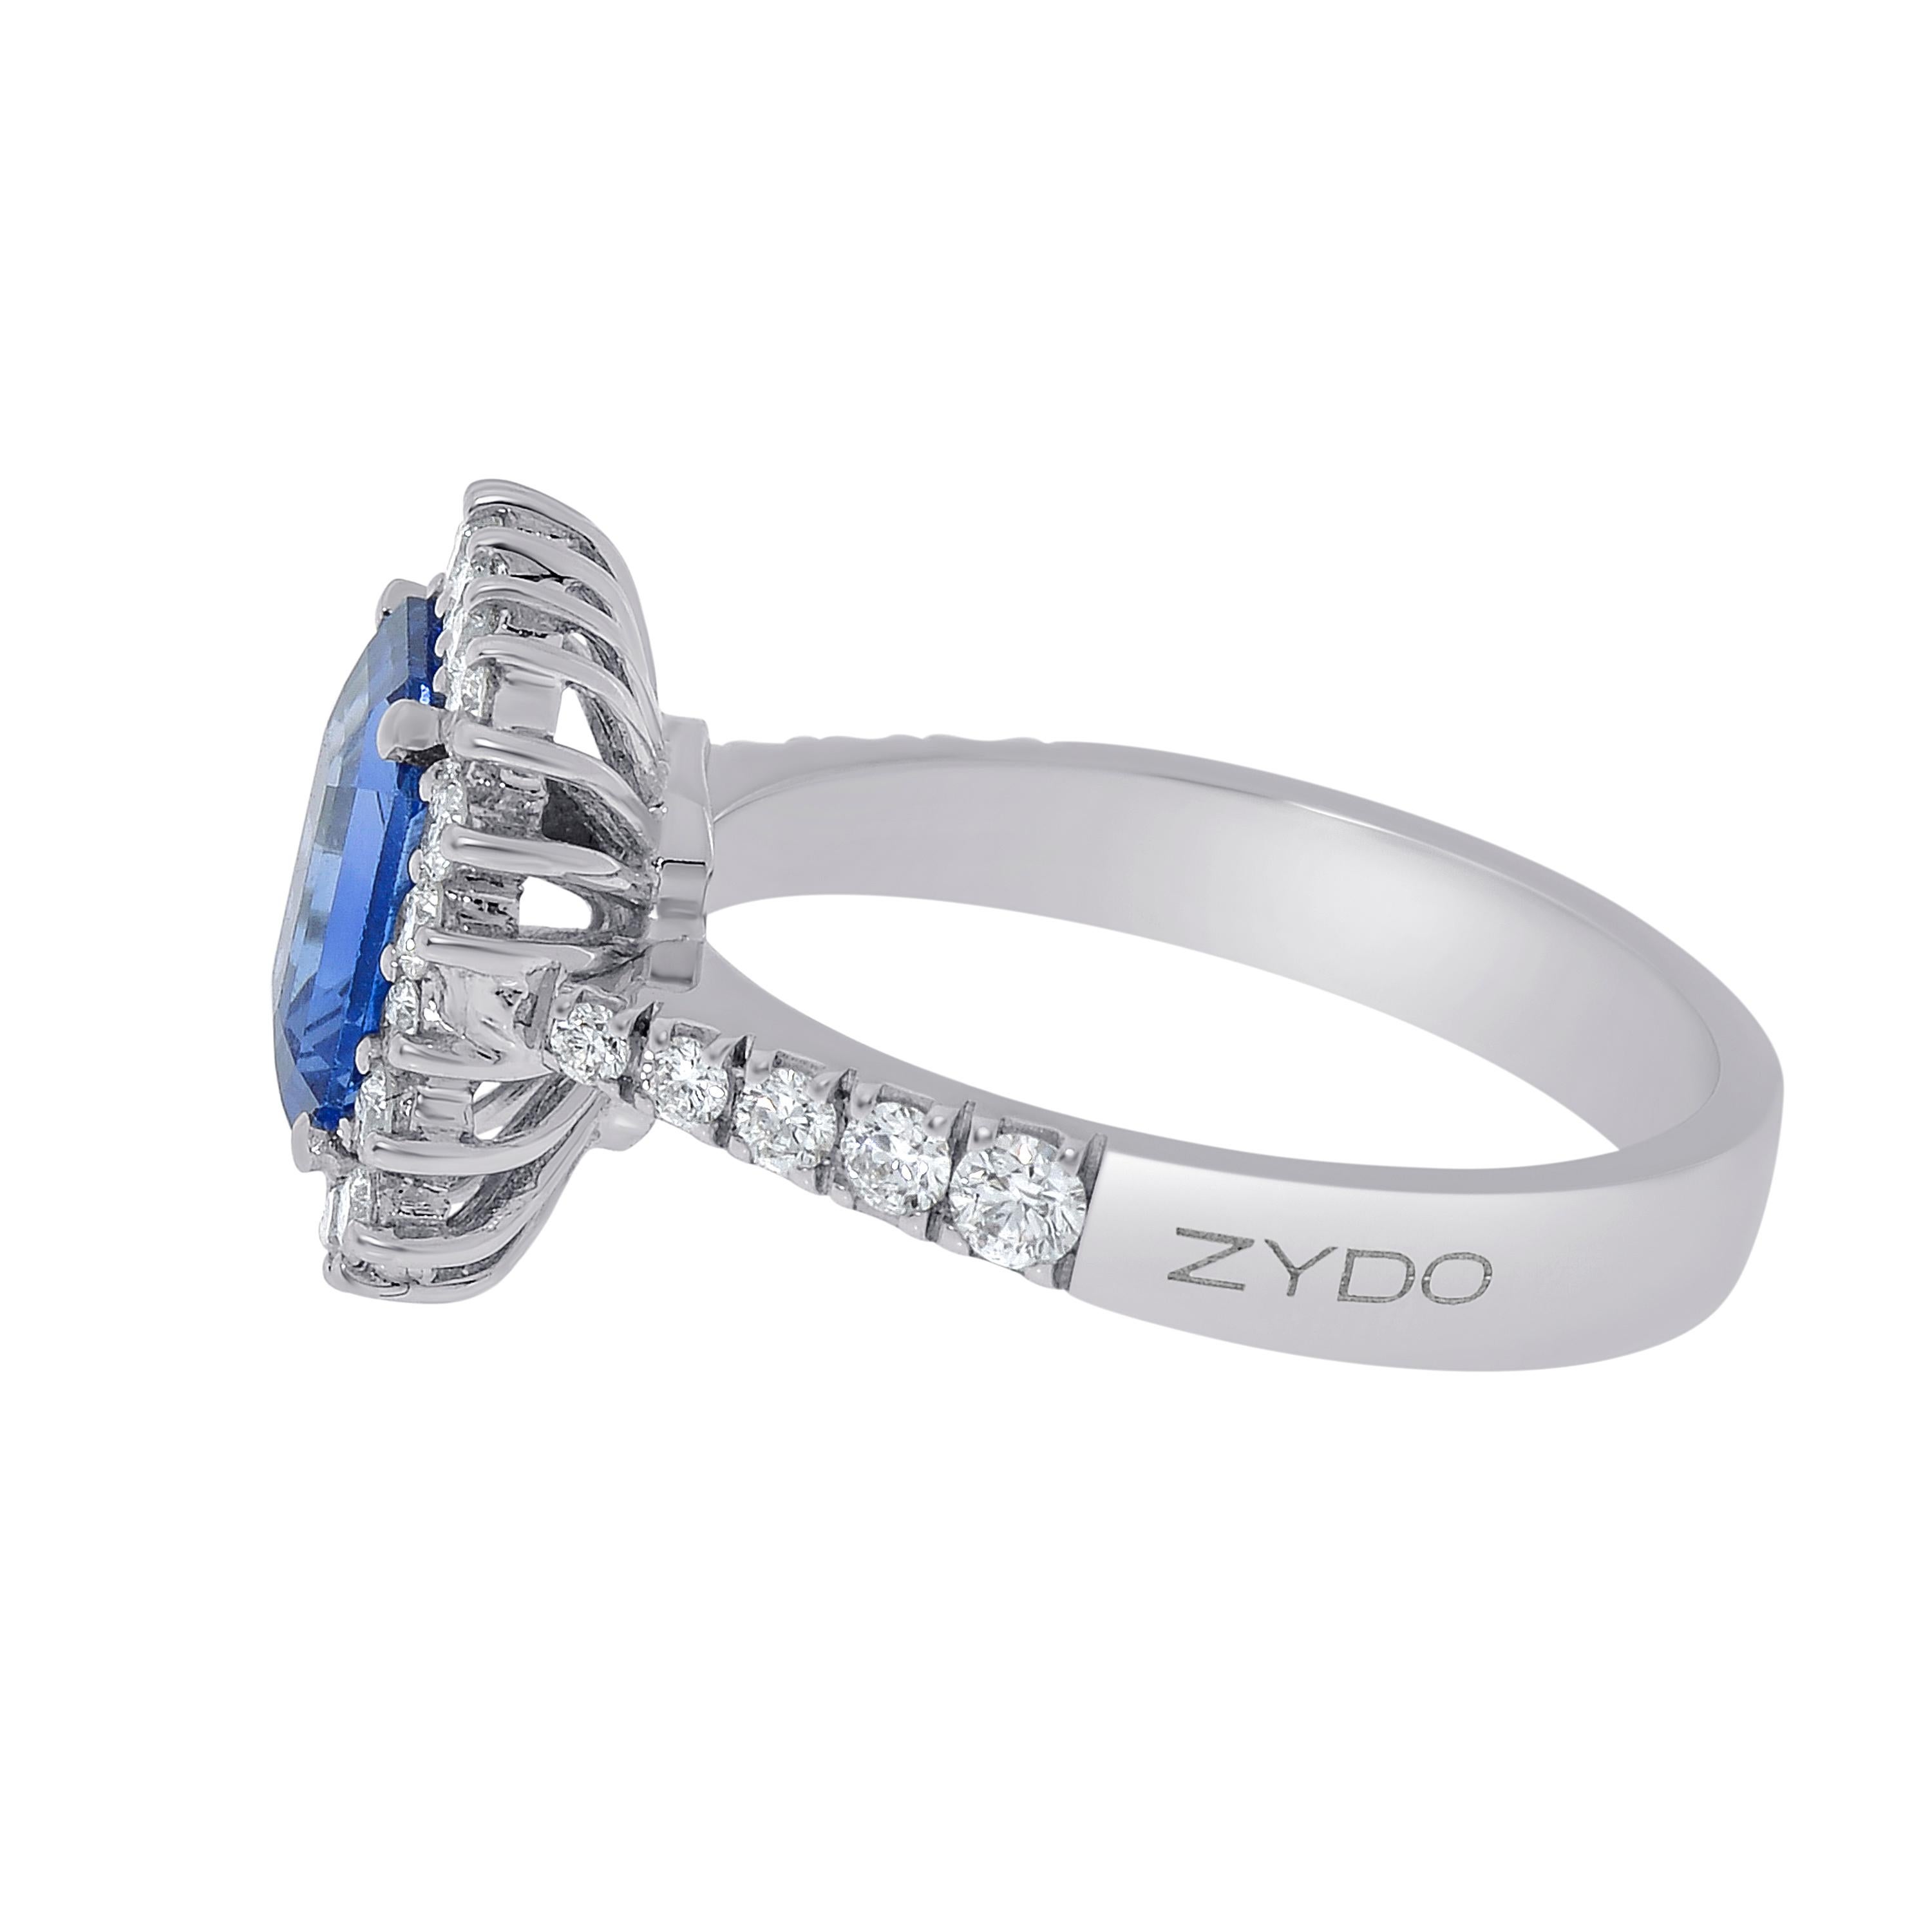 Contemporary Zydo 18K White Gold Sapphire & Diamonds Cocktail Ring sz. 7 For Sale